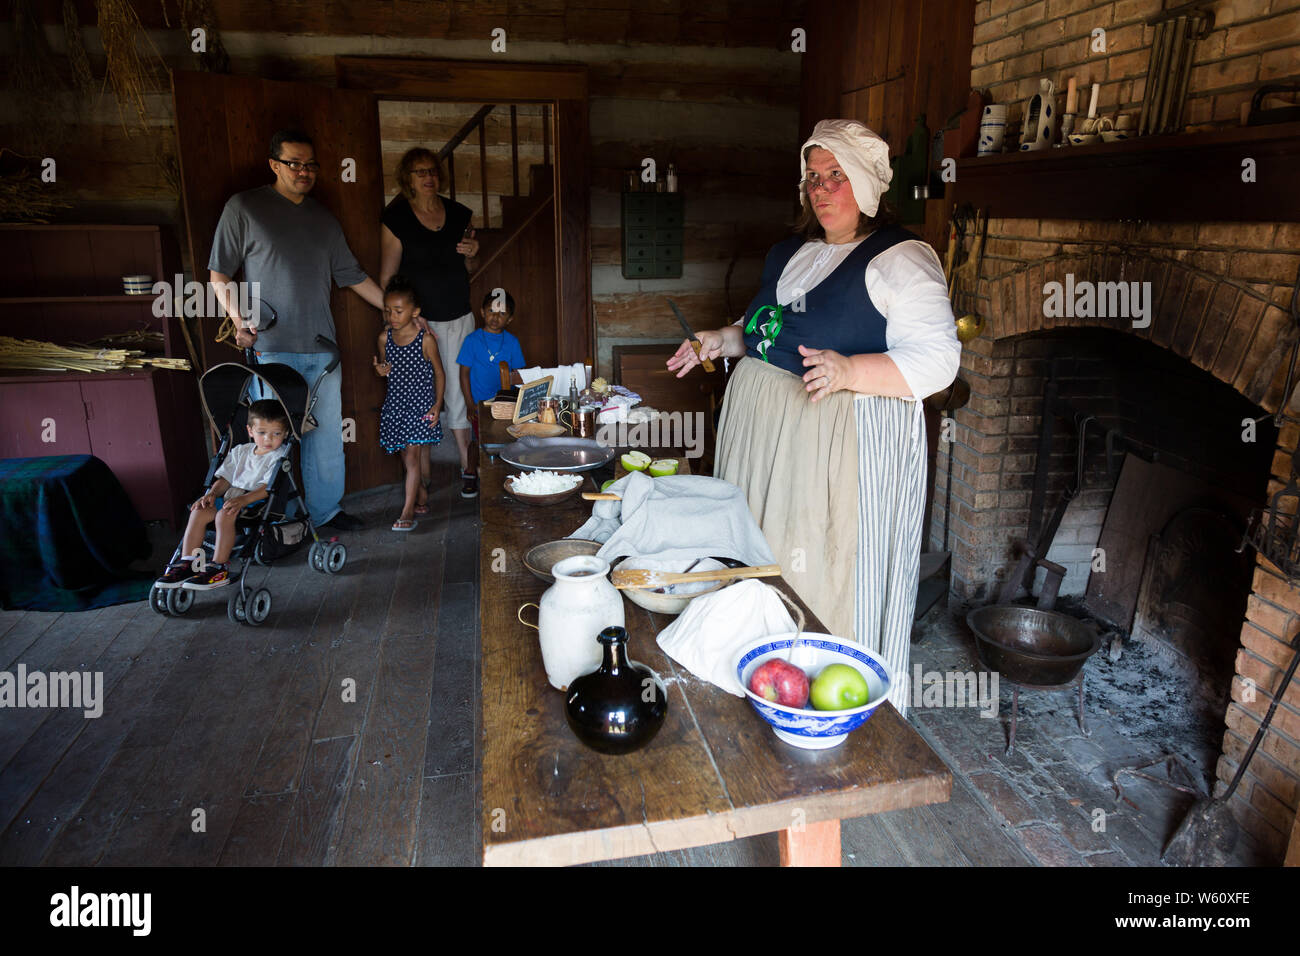 A family walks in as a reenactress demonstrates cooking techniques during an event at Historic Old Fort Wayne in Fort Wayne, Indiana, USA. Stock Photo